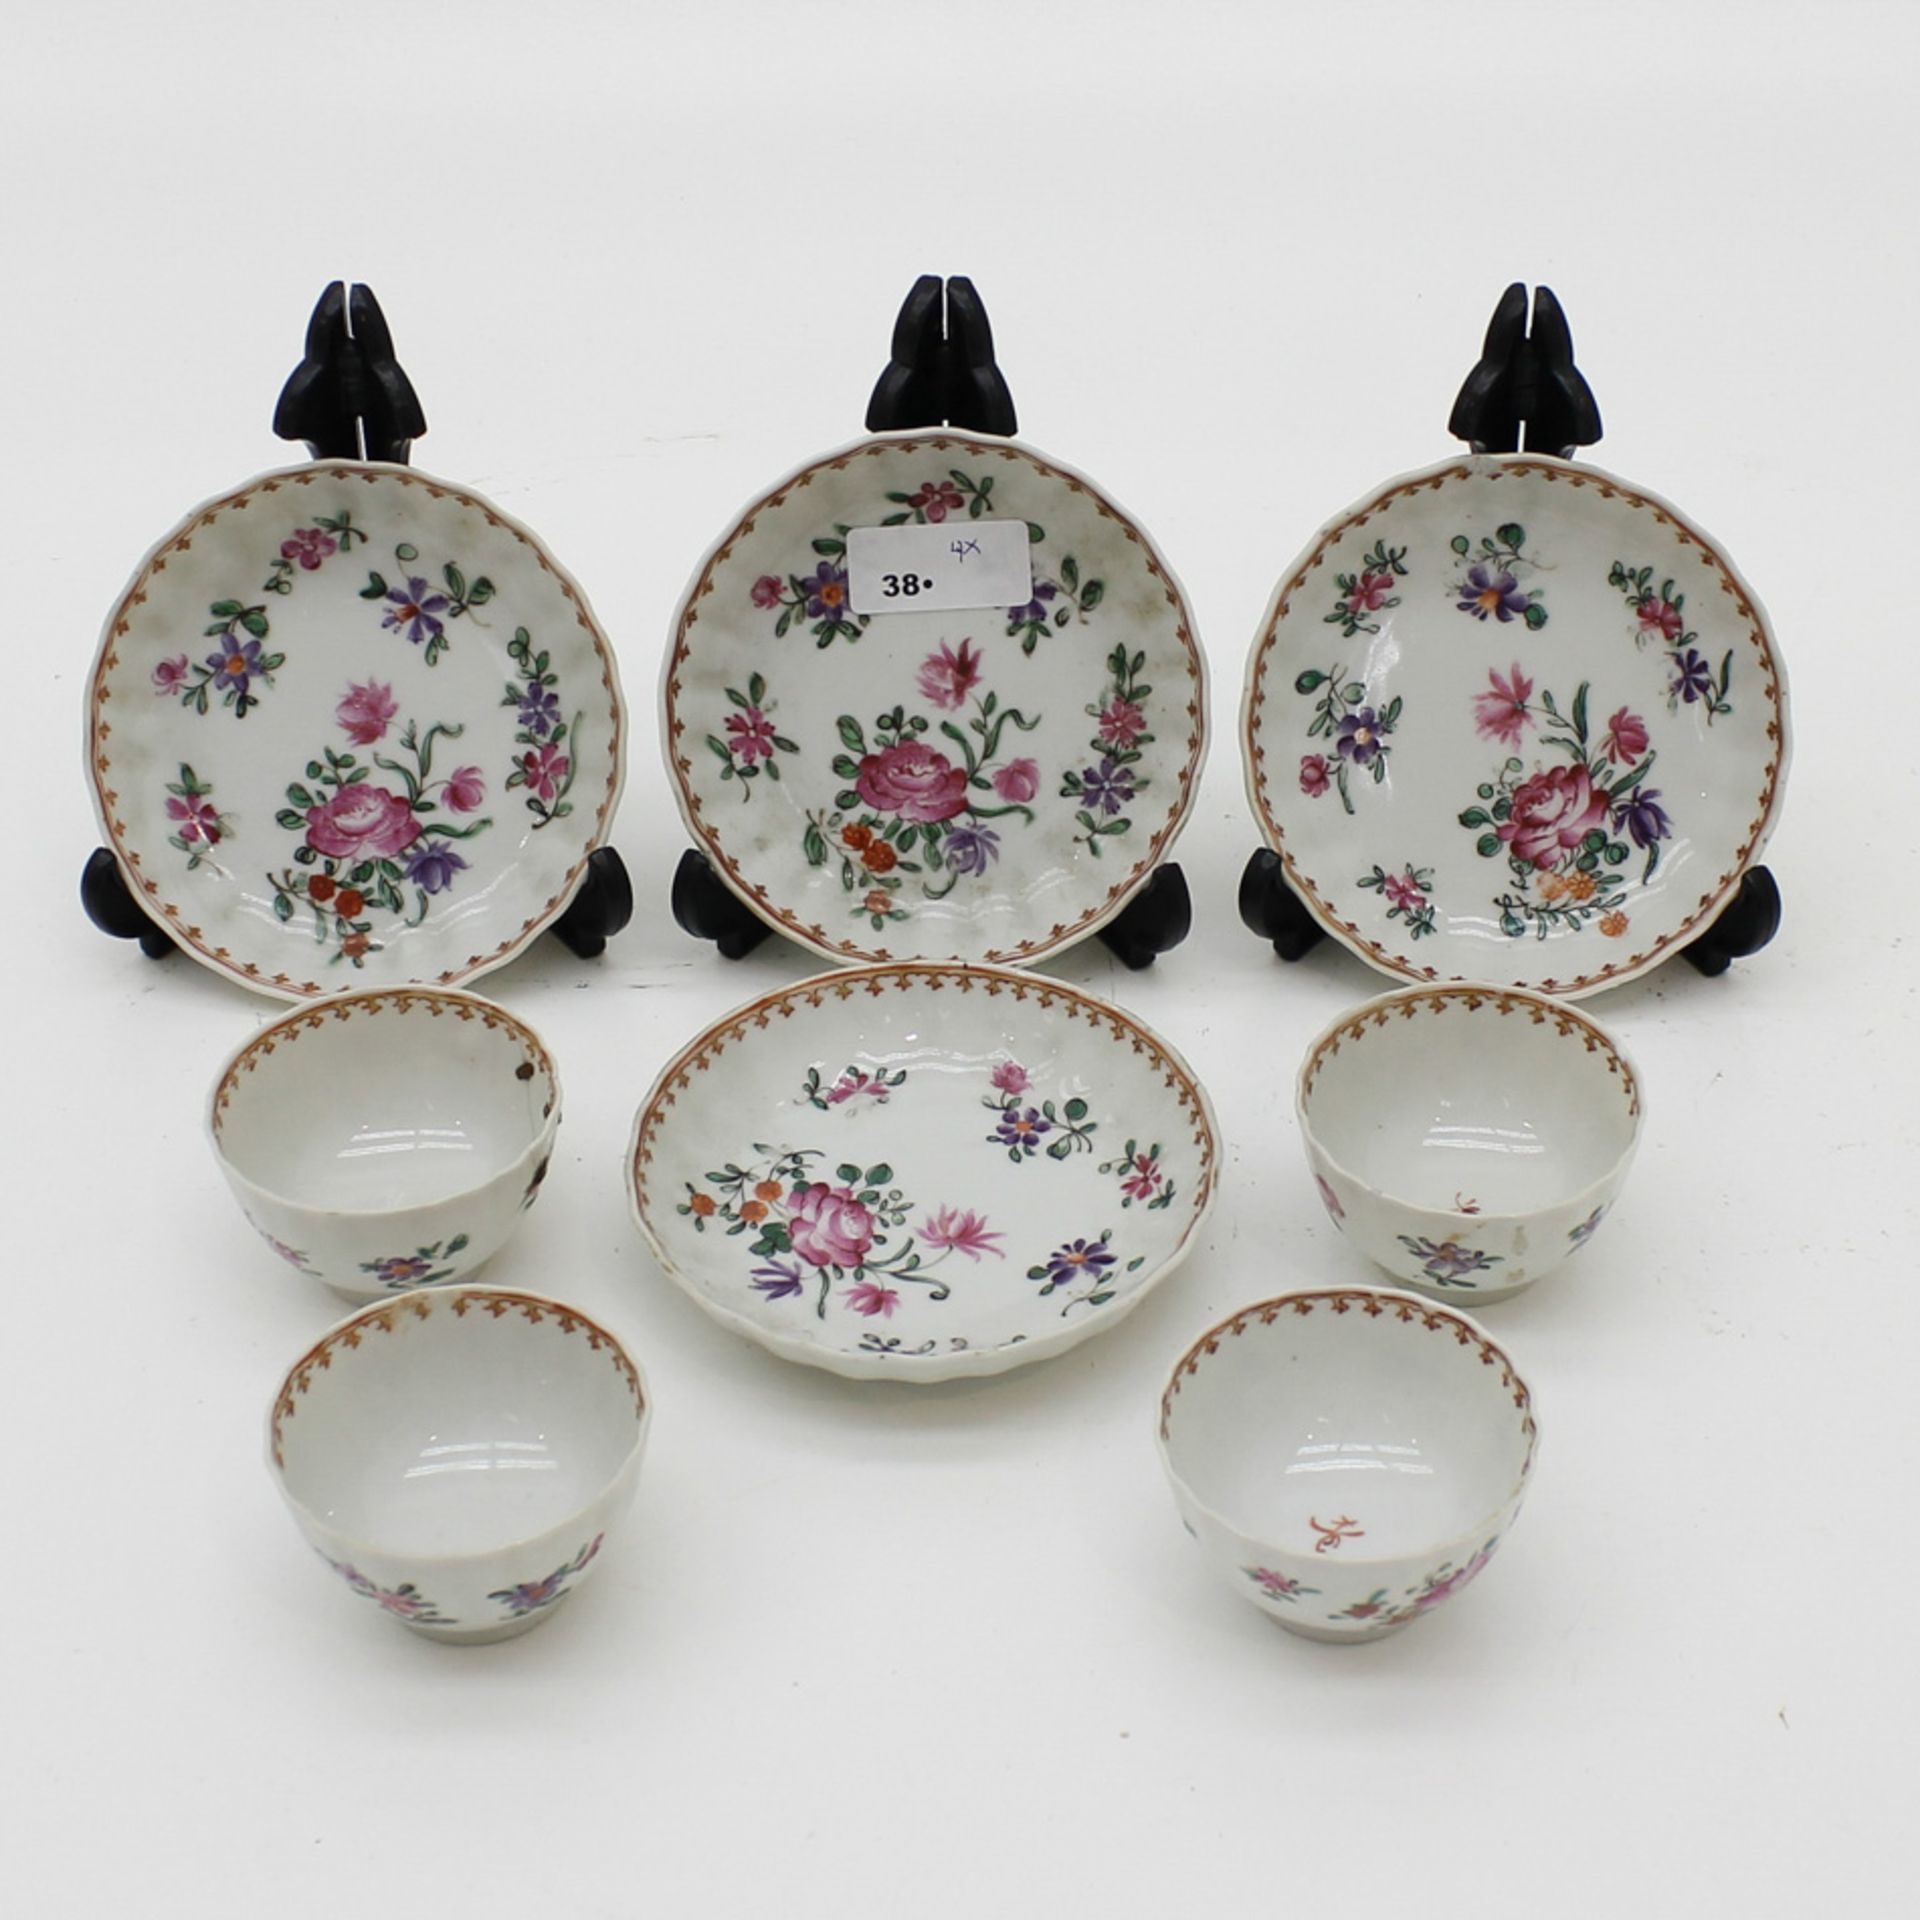 18th Century China Porcelain Family Rose Cups & Saucers Set of 4 cups and saucer sets, 1 saucer